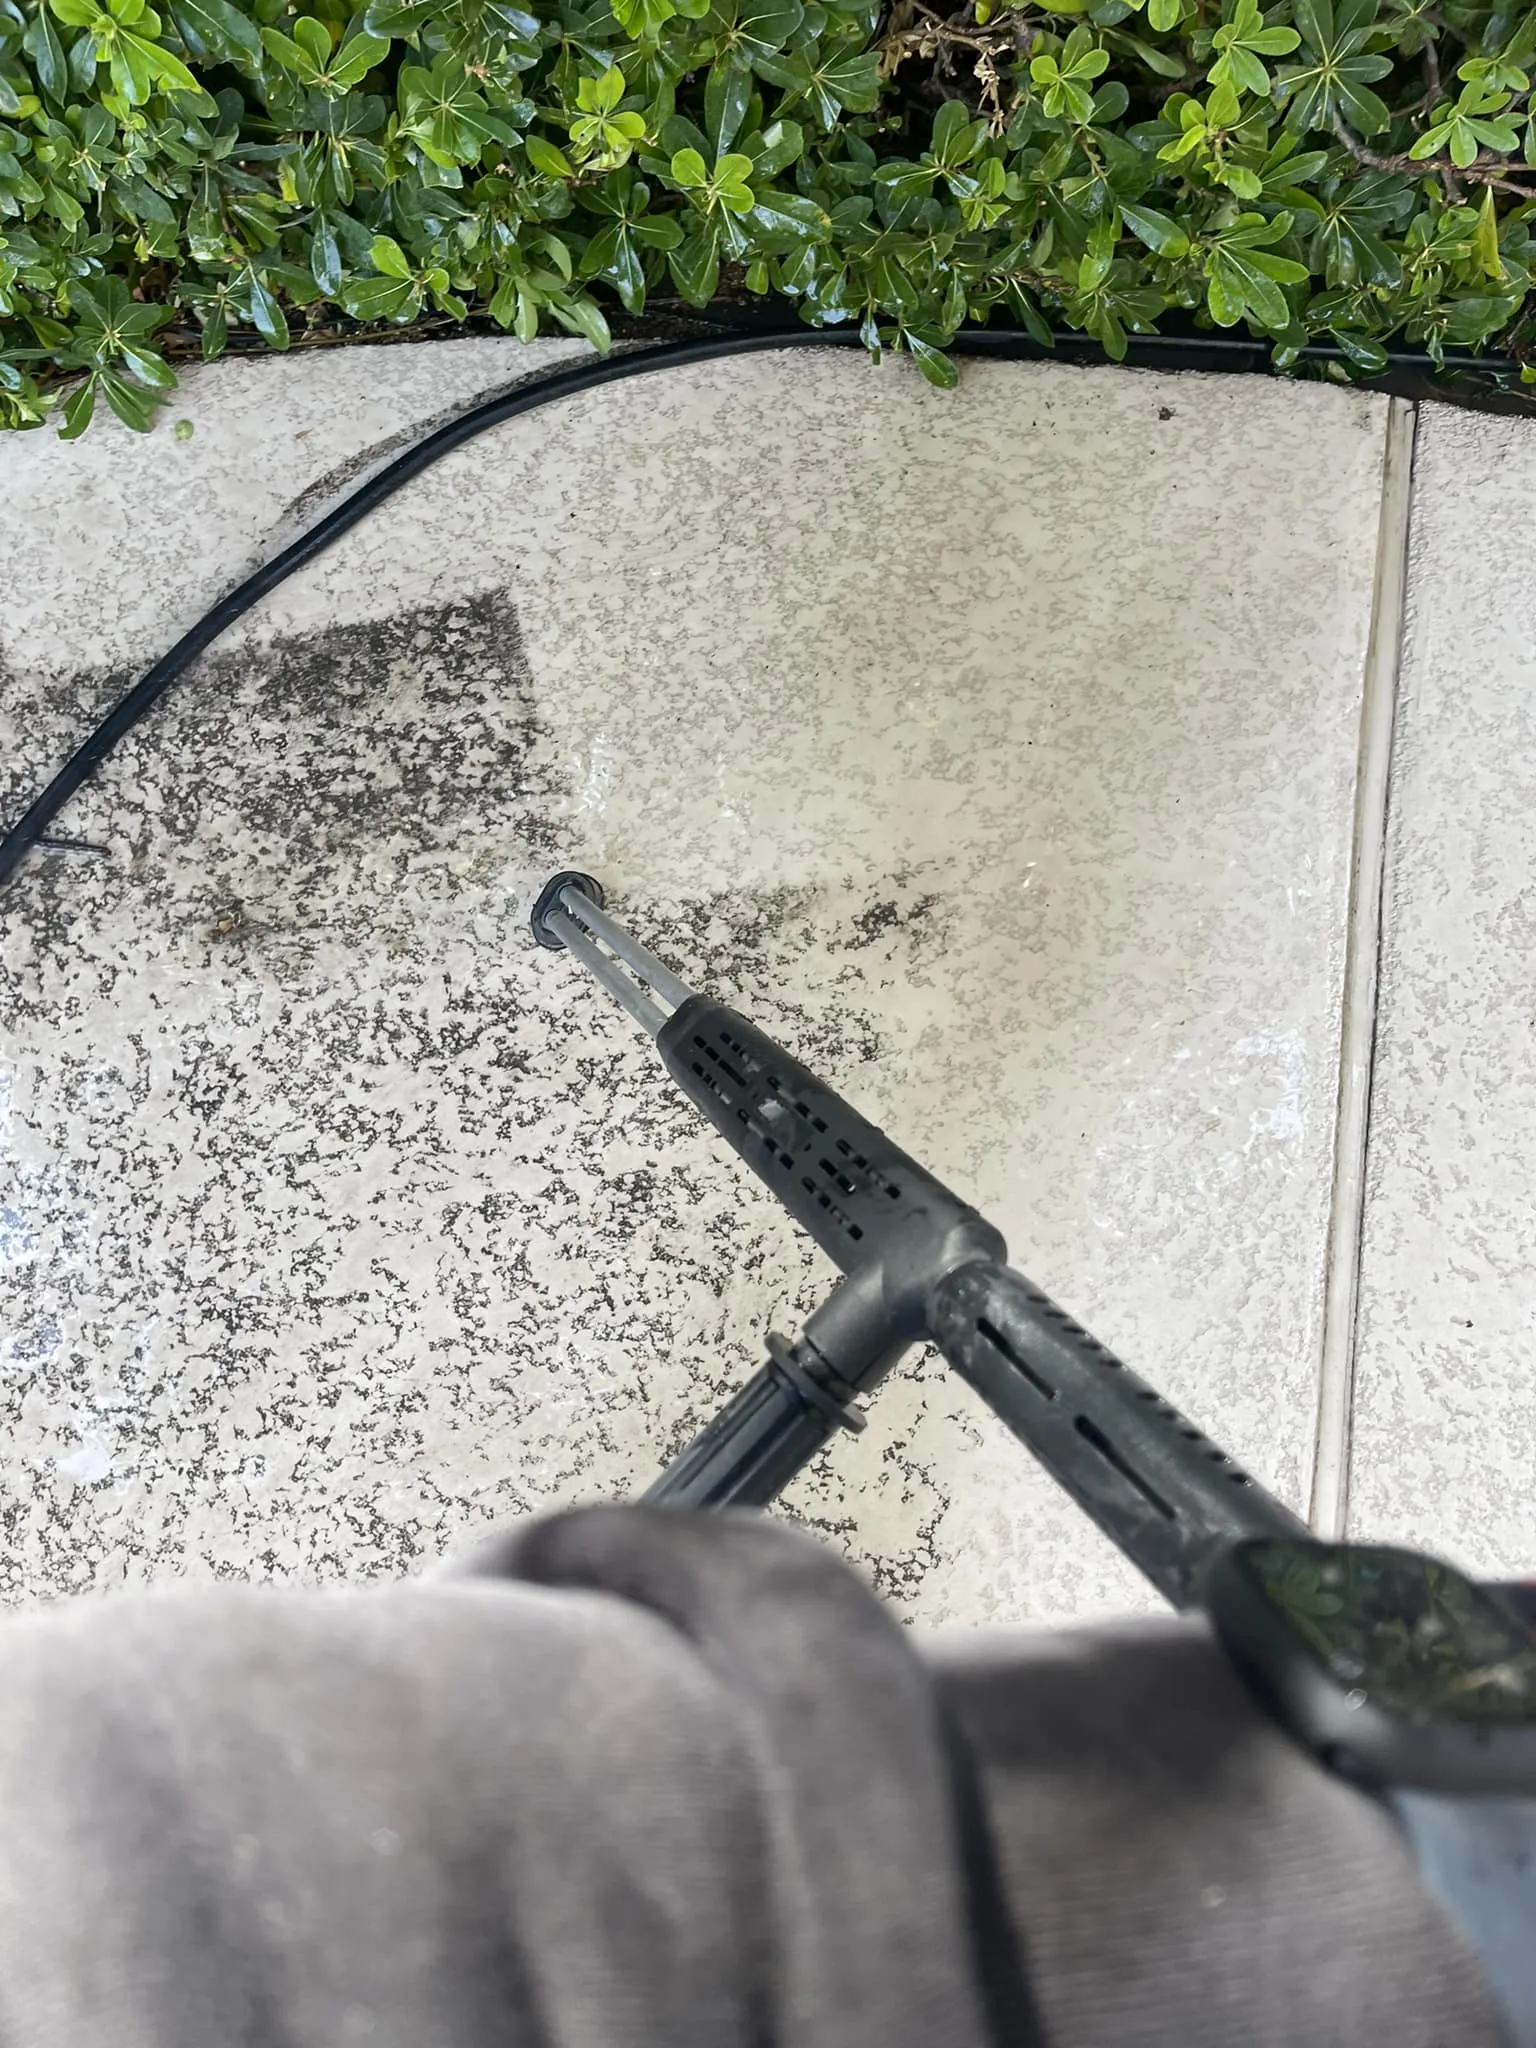 Professional residential pressure washing services are offered by Superior Window Cleaning & Pressure Washing in Las Vegas.